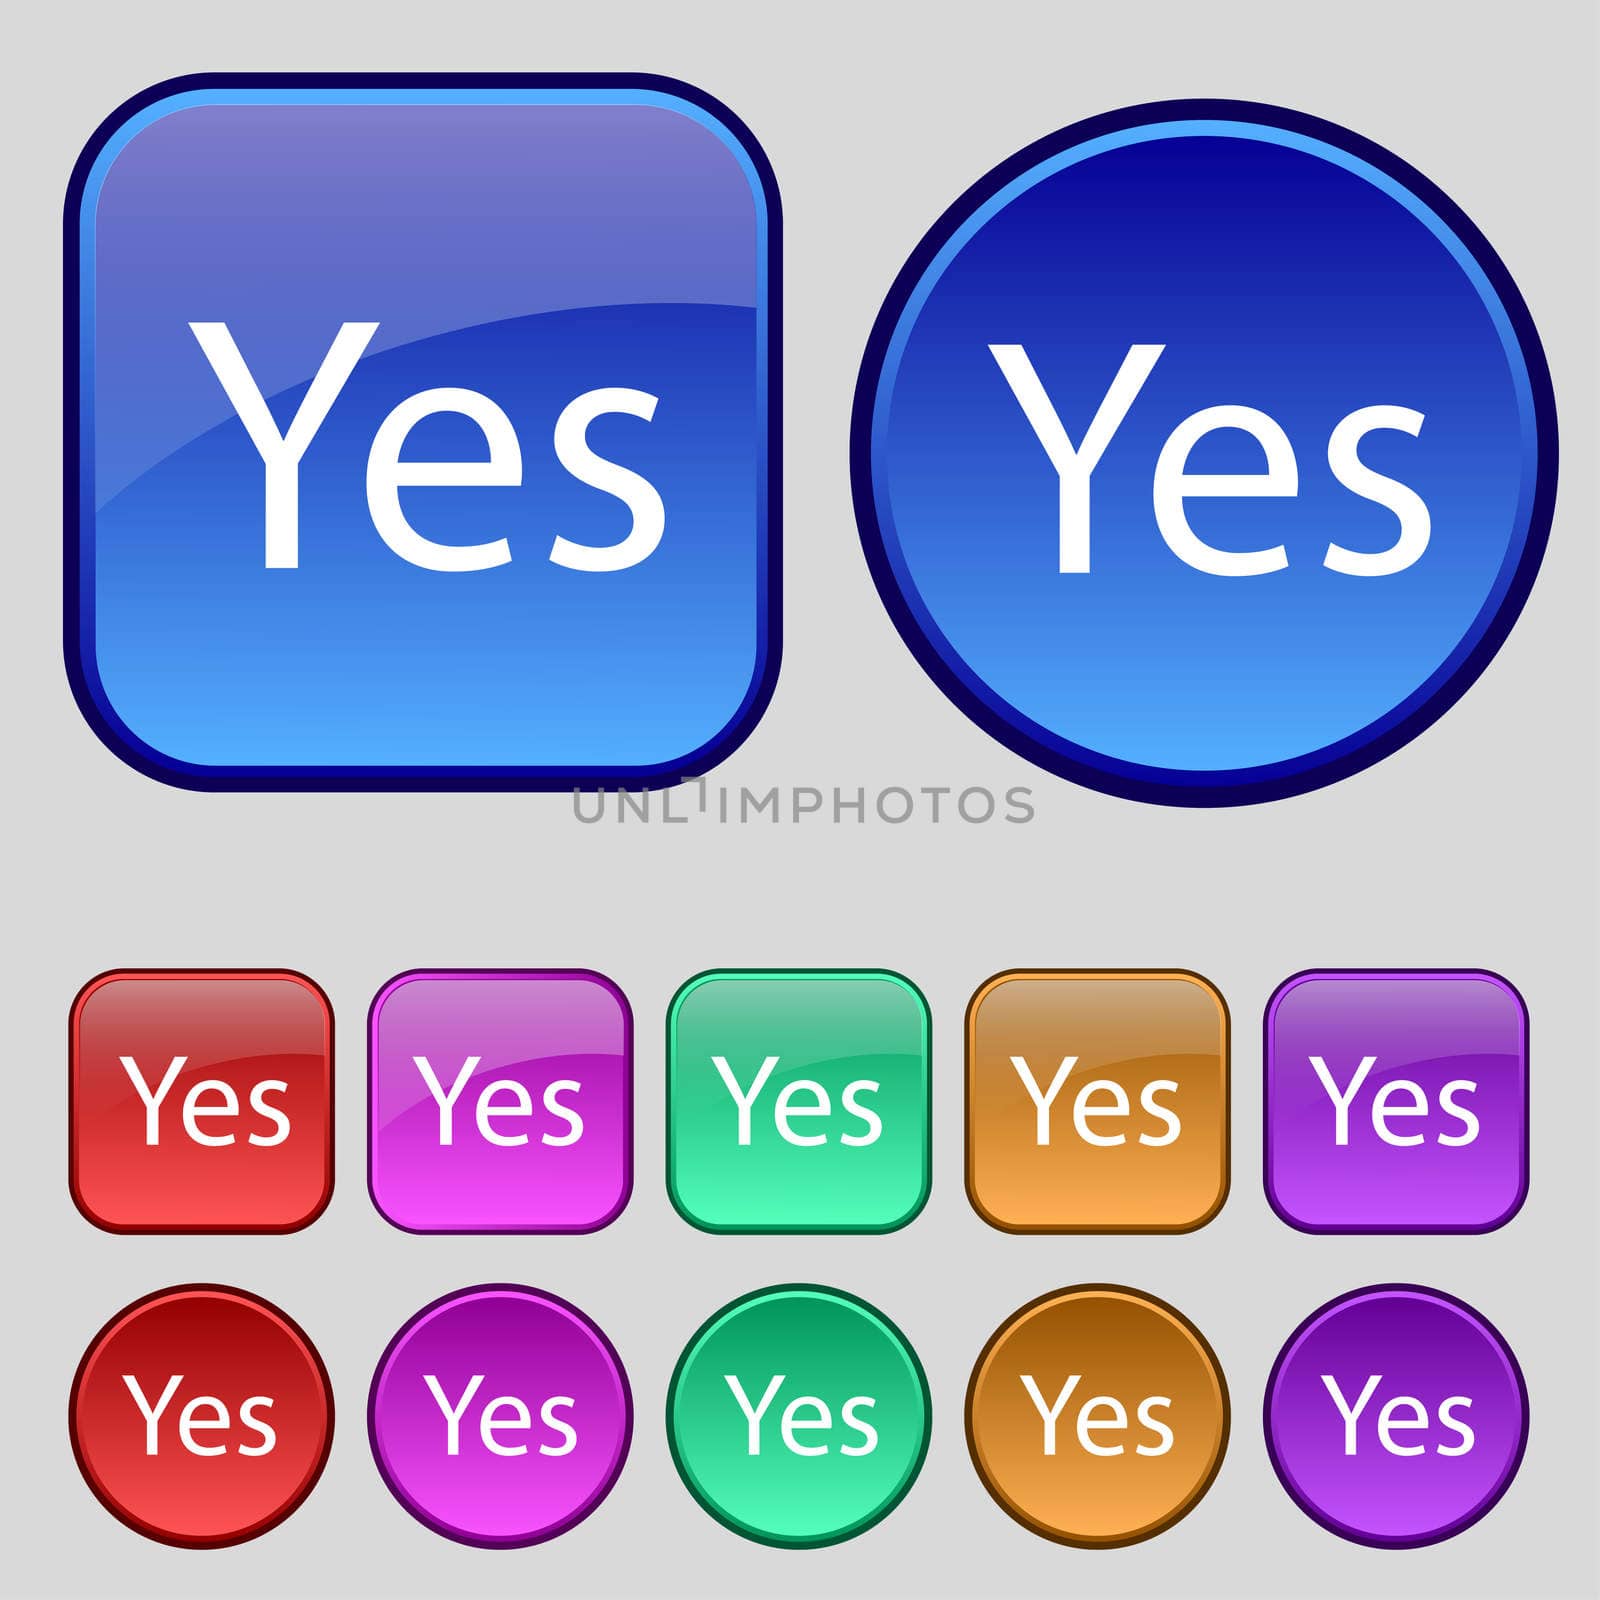 Yes sign icon. Positive check symbol. Set of colored buttons. illustration